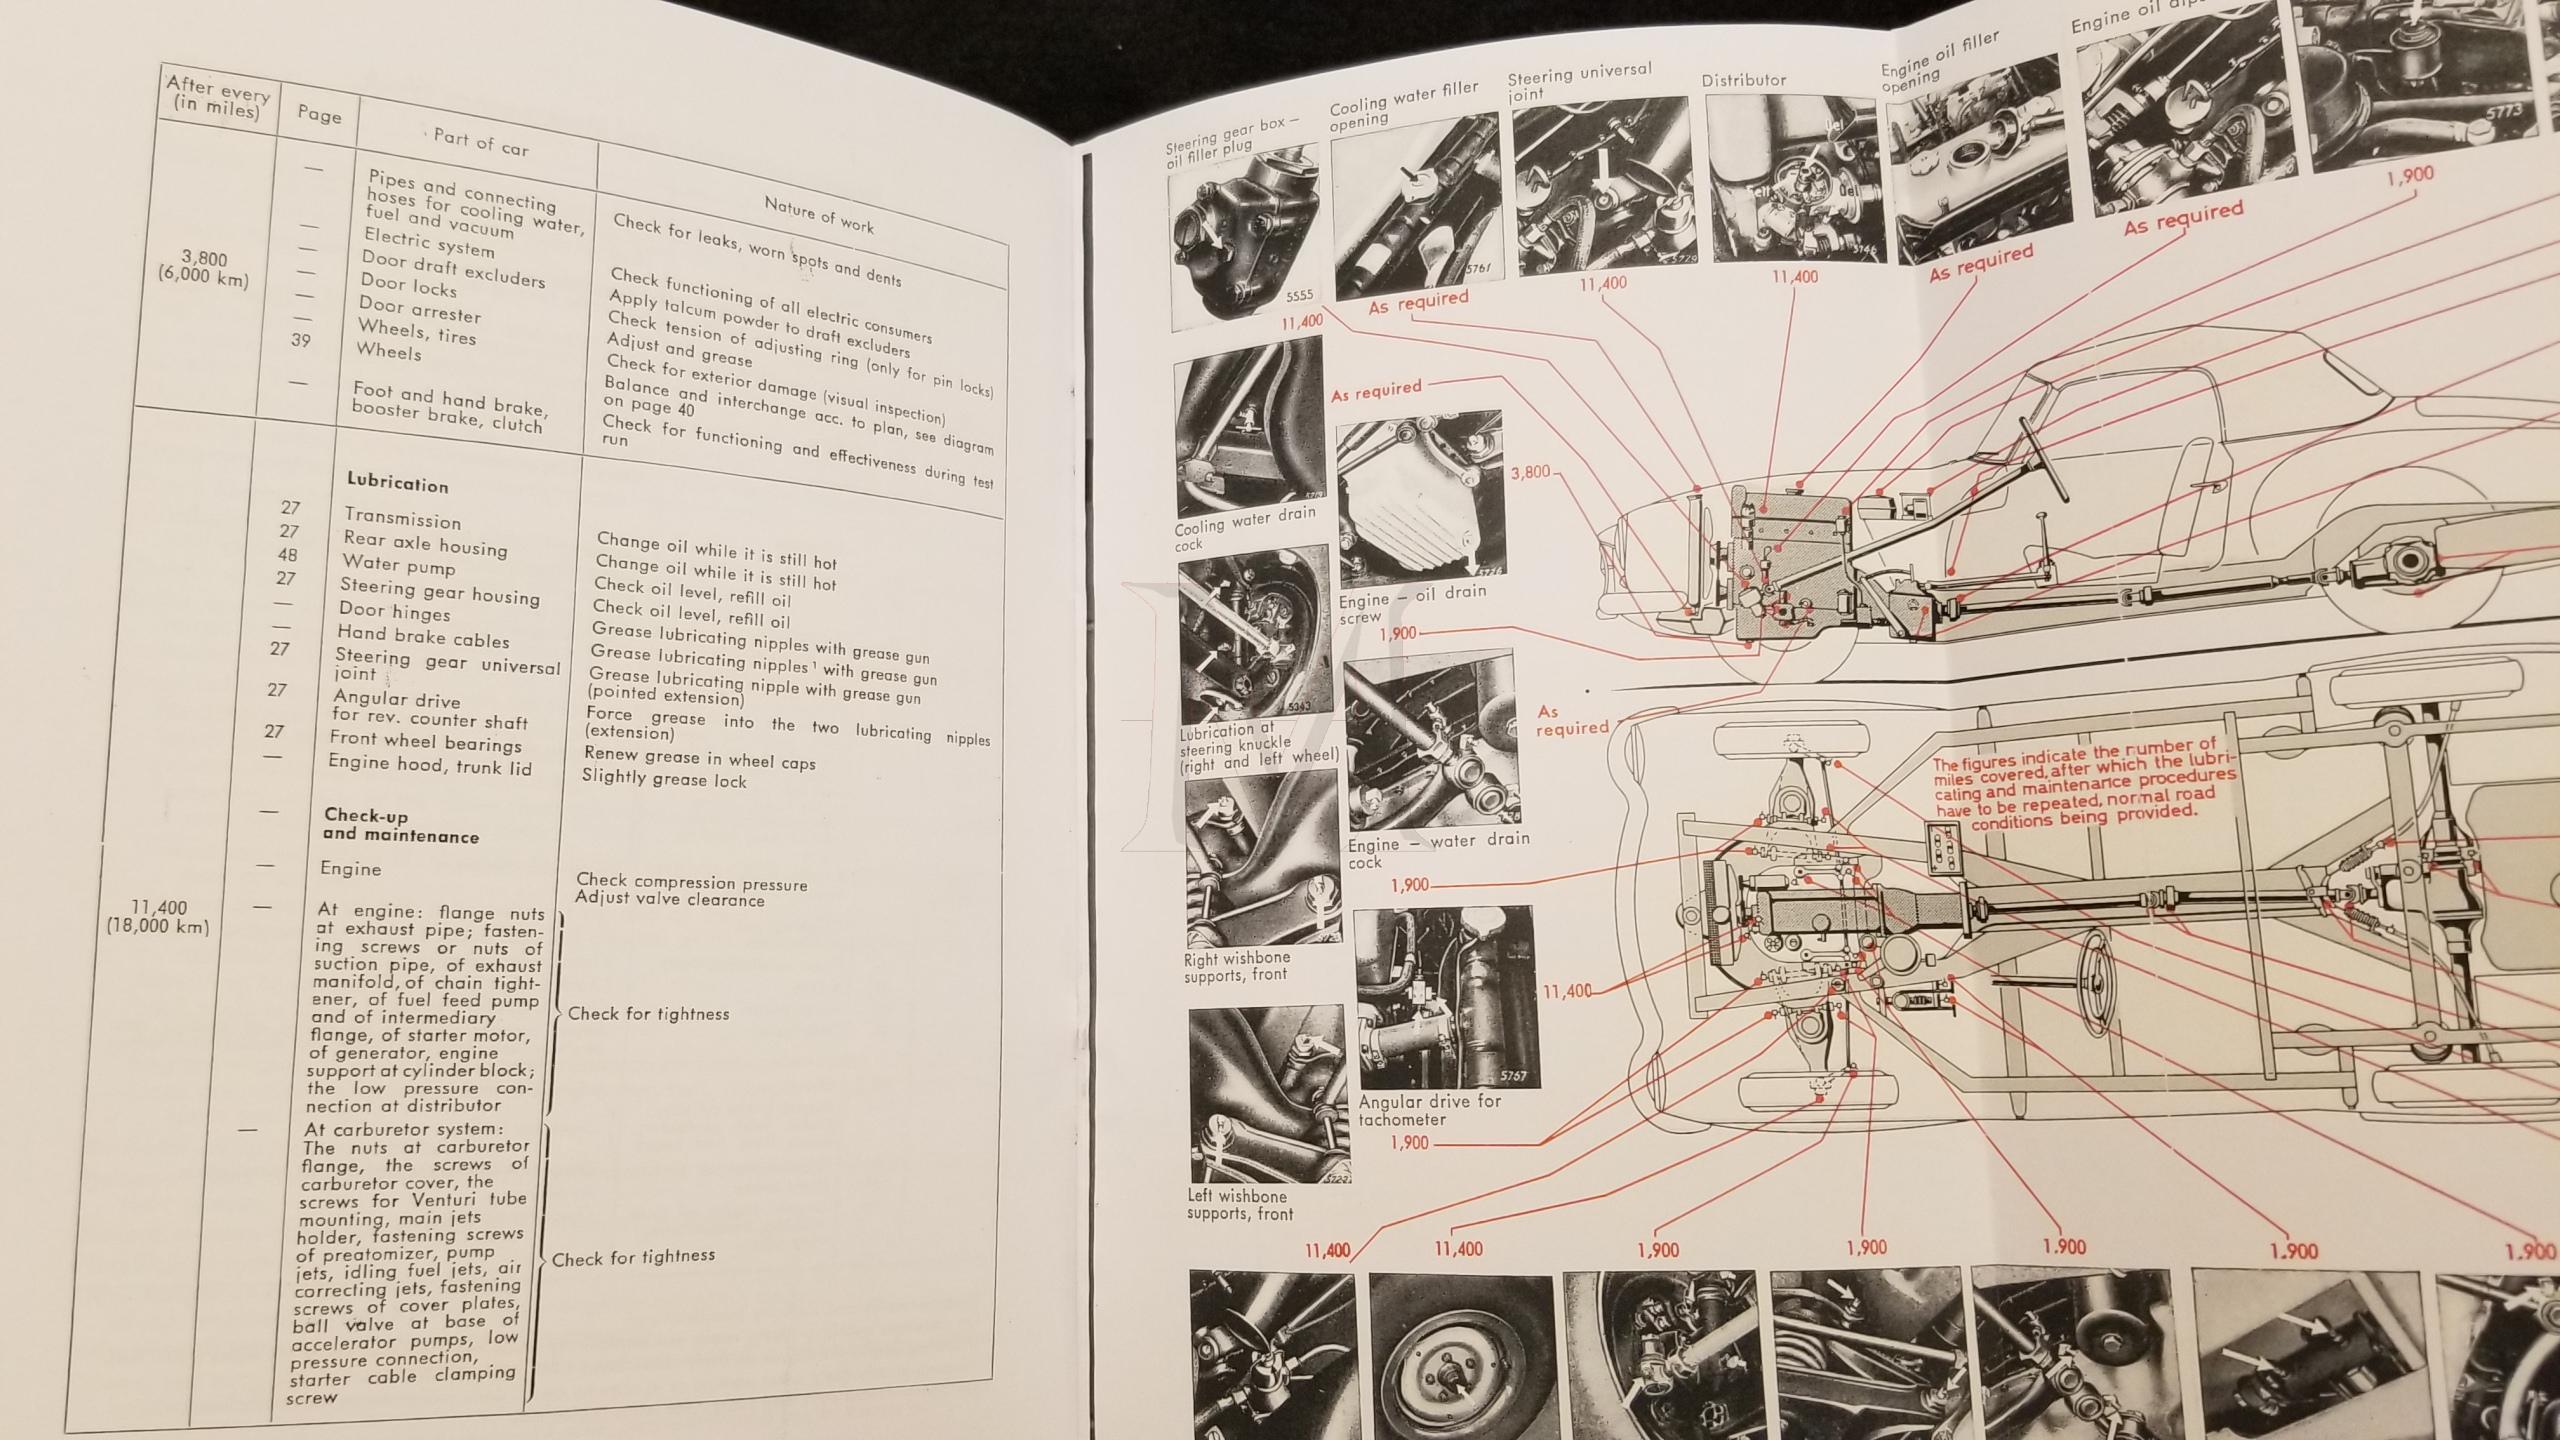 190SL OWNERS MANUAL